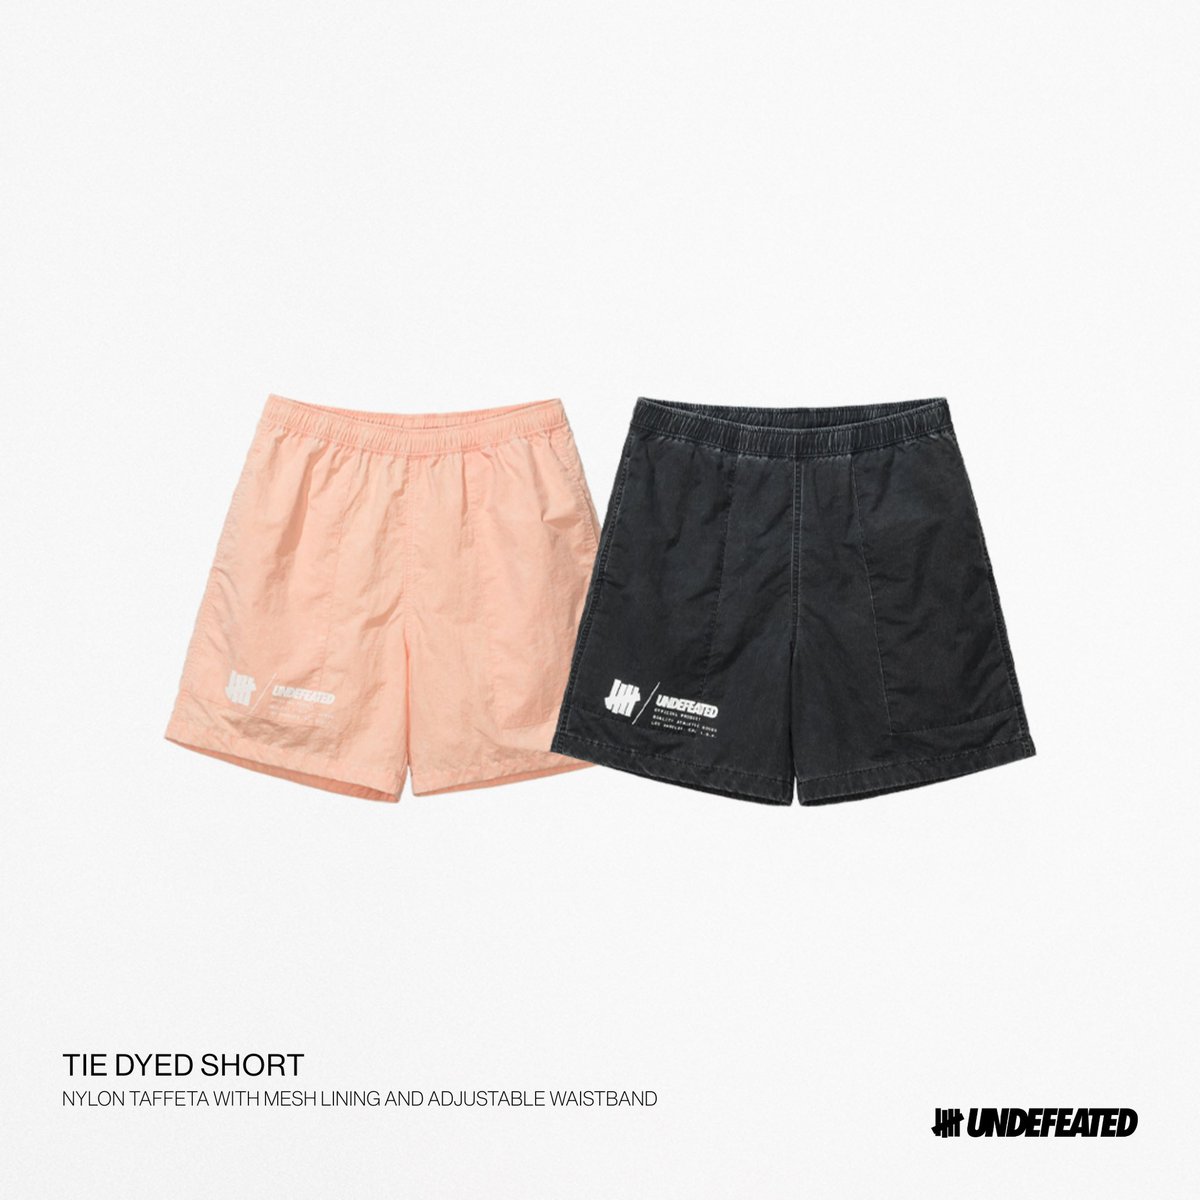 UNDEFEATED Summer 2024 Drop 2 Bottoms Available Friday, 5/24 exclusively at all UNDEFEATED Global Chapter Stores and undefeated.com